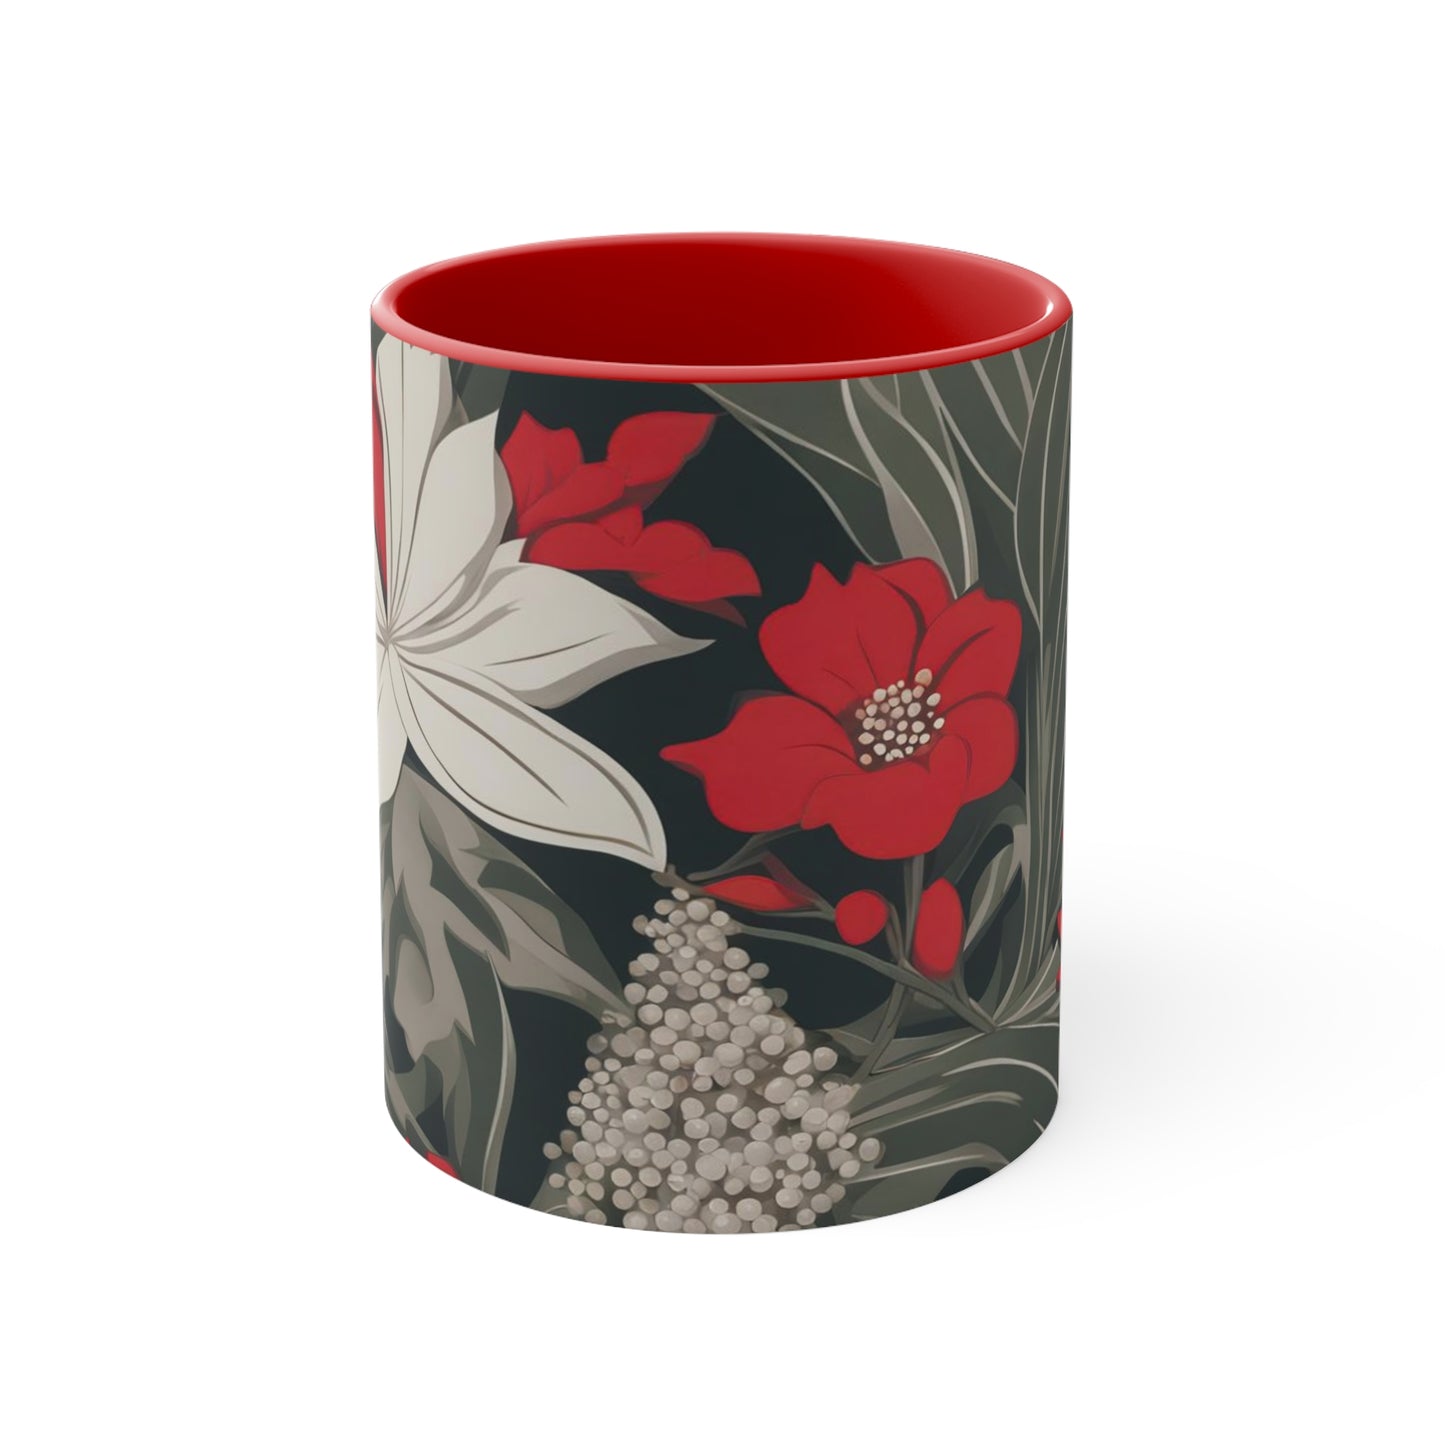 Red and White Flowers, Ceramic Mug - Perfect for Coffee, Tea, and More!